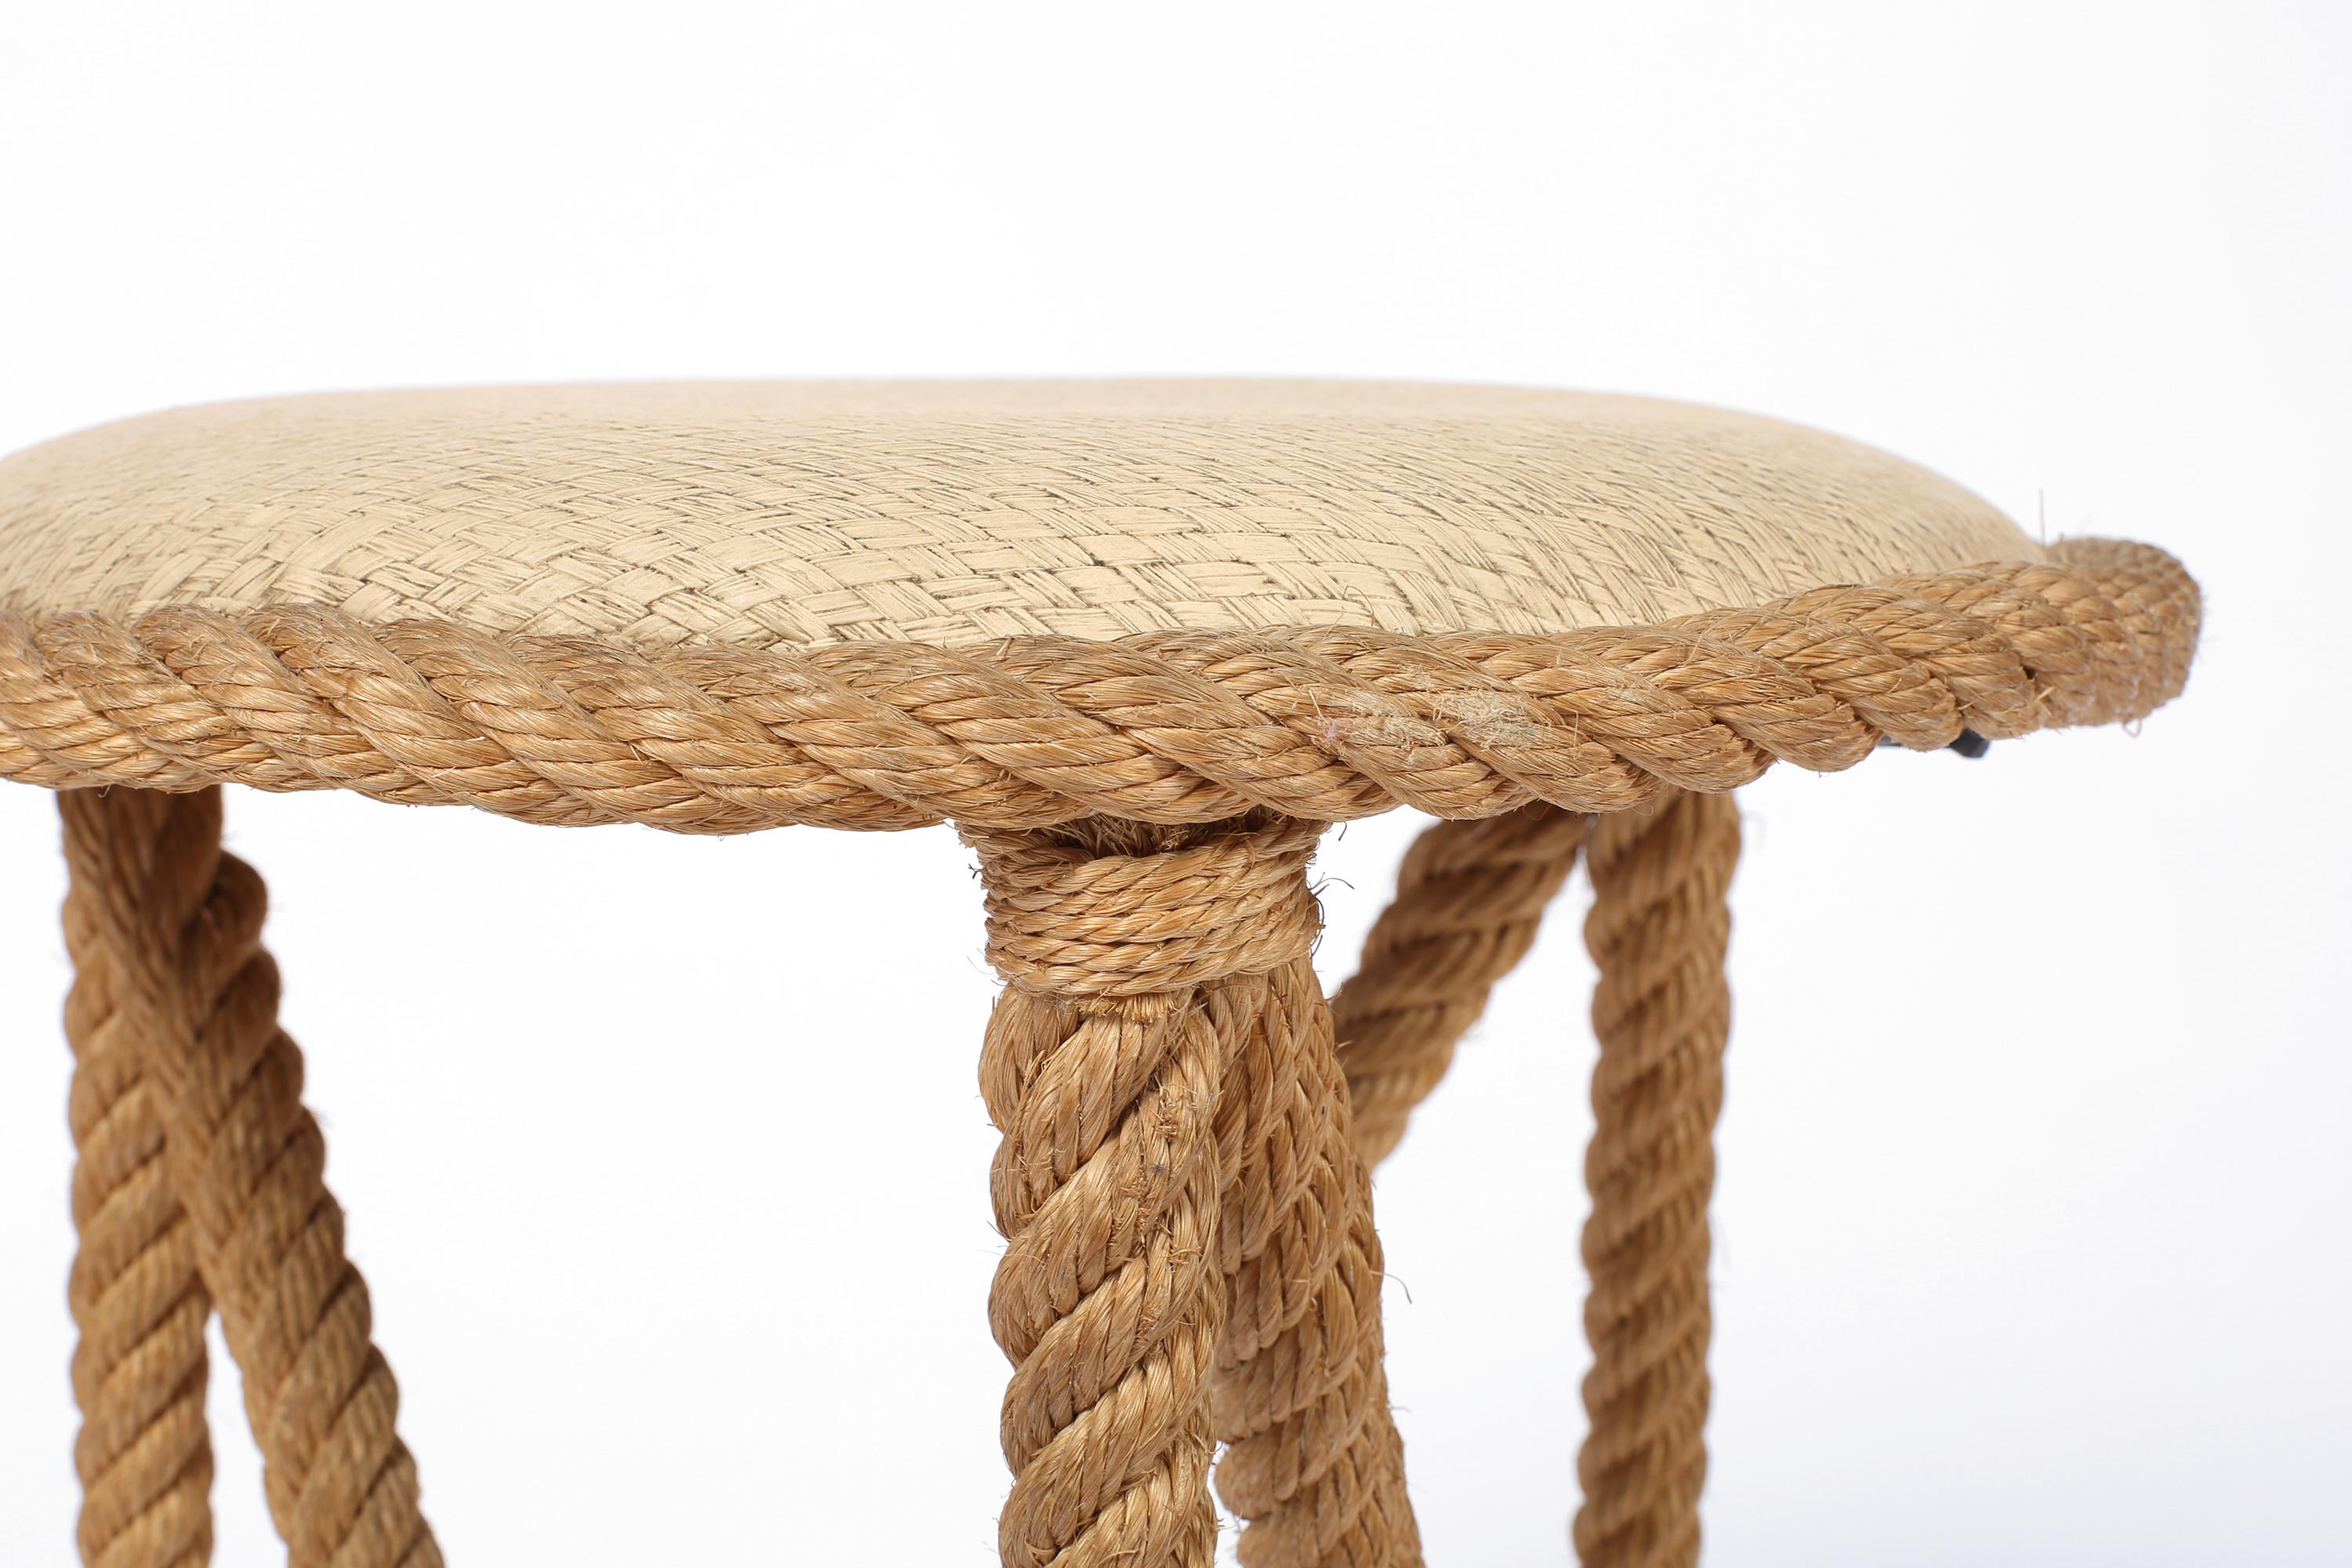 A fun rope clad steel stool by Adrian Audoux & Frida Minnet, with asymmetric zig-zag legs and faux woven upholstered seat pad. French, c. 1950.